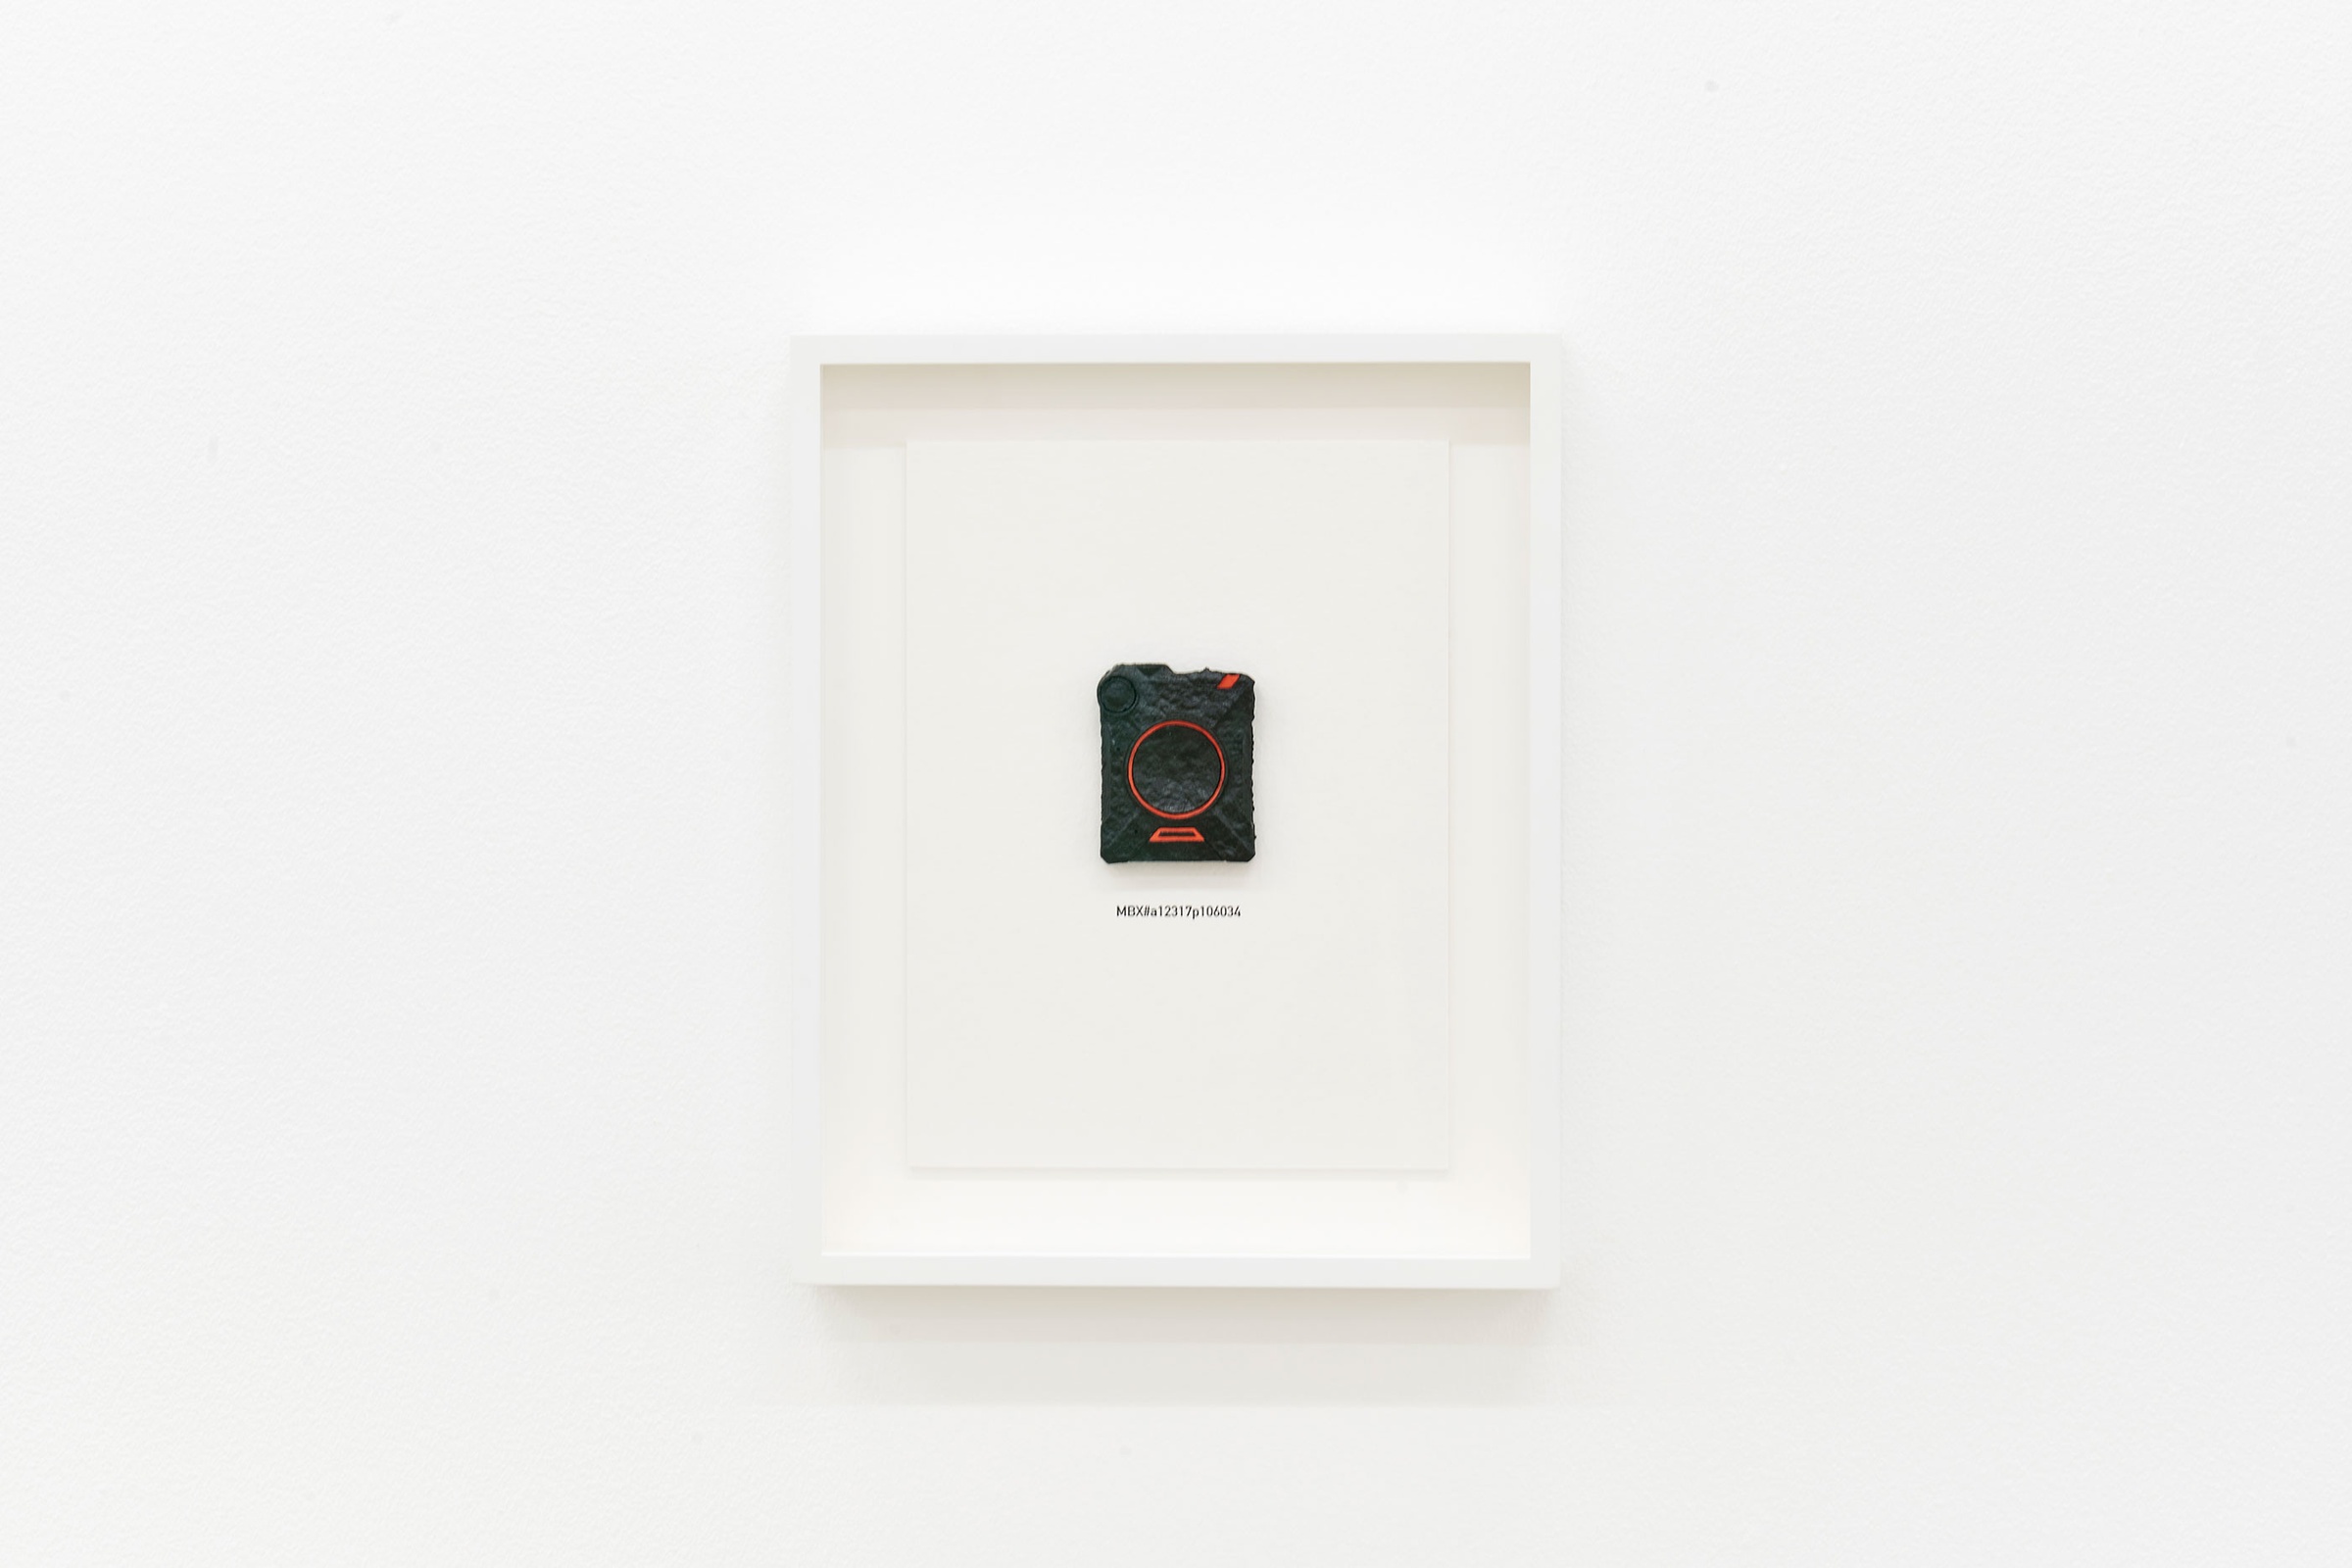 Installation photograph of the Common exhibition. Mark Bradford’s ‘Life Size’, a framed handmade reproduction of a policeman’s body camera is hung on a white wall.
